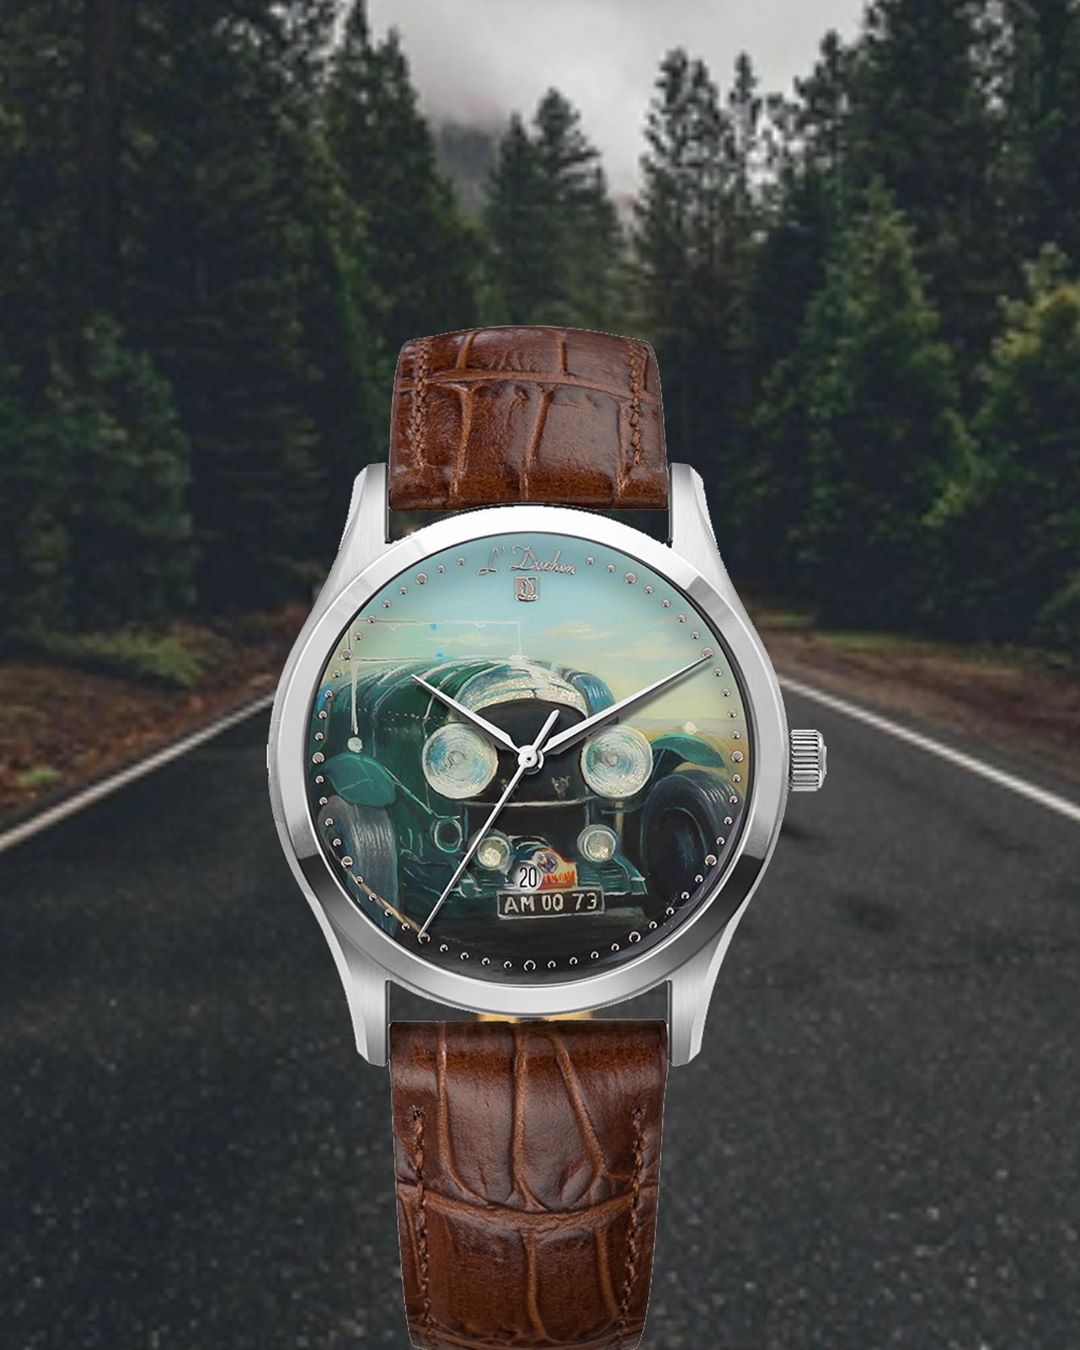 lduchen creates this exceptional one-of-a-kind timepiece to push new creative, technical and artistic boundaries.